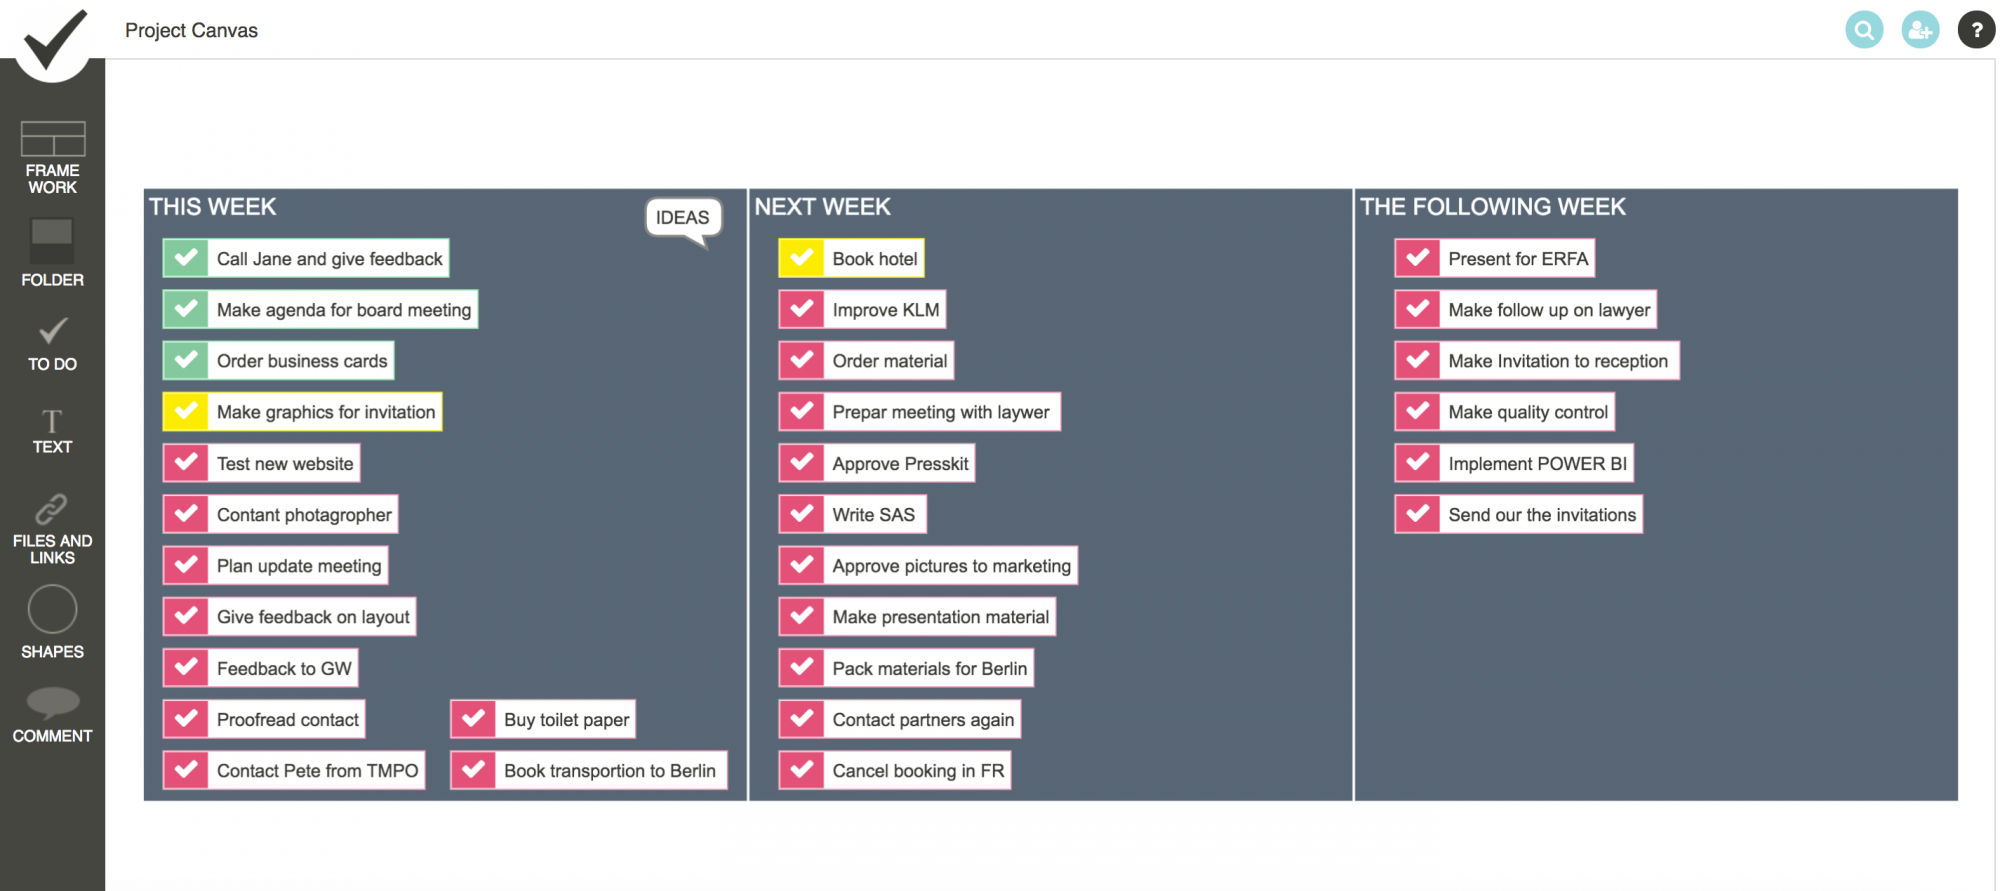 canvas planner weekly schedule task and opgaver